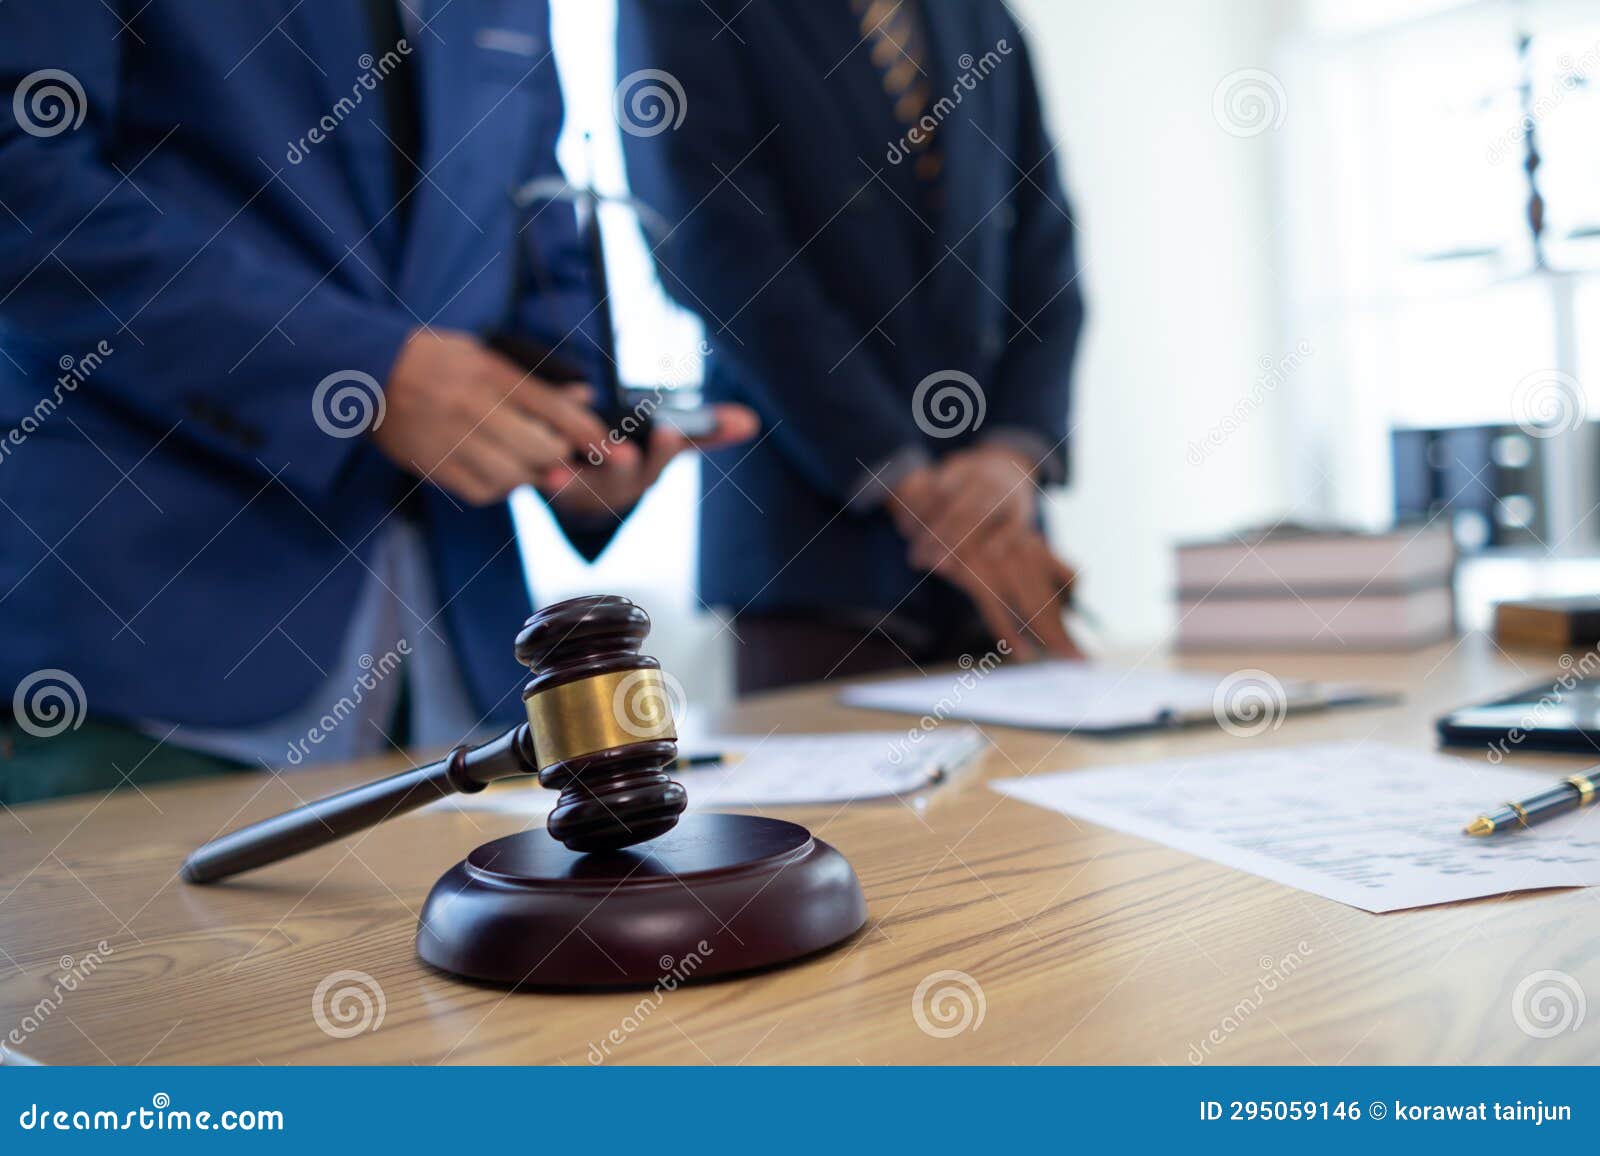 judge gavel in law office is placed on table to ize judge deciding lawsuit. gavel wood on wooden table of lawyers in lega